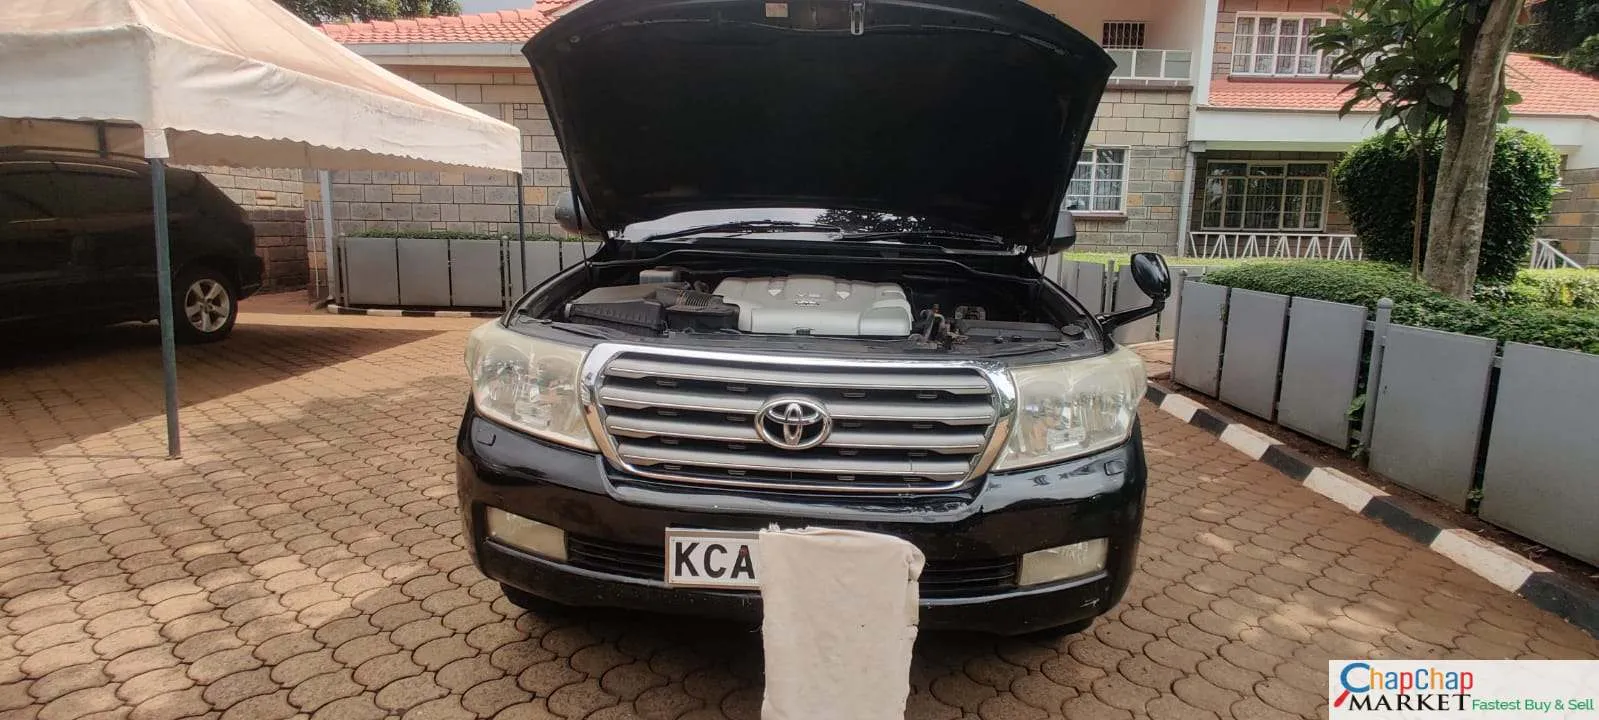 Toyota Land cruiser V8 for sale in Kenya 200 series KCA 2.9M ONLY TRADE IN OK EXCLUSIVE (SOLD)